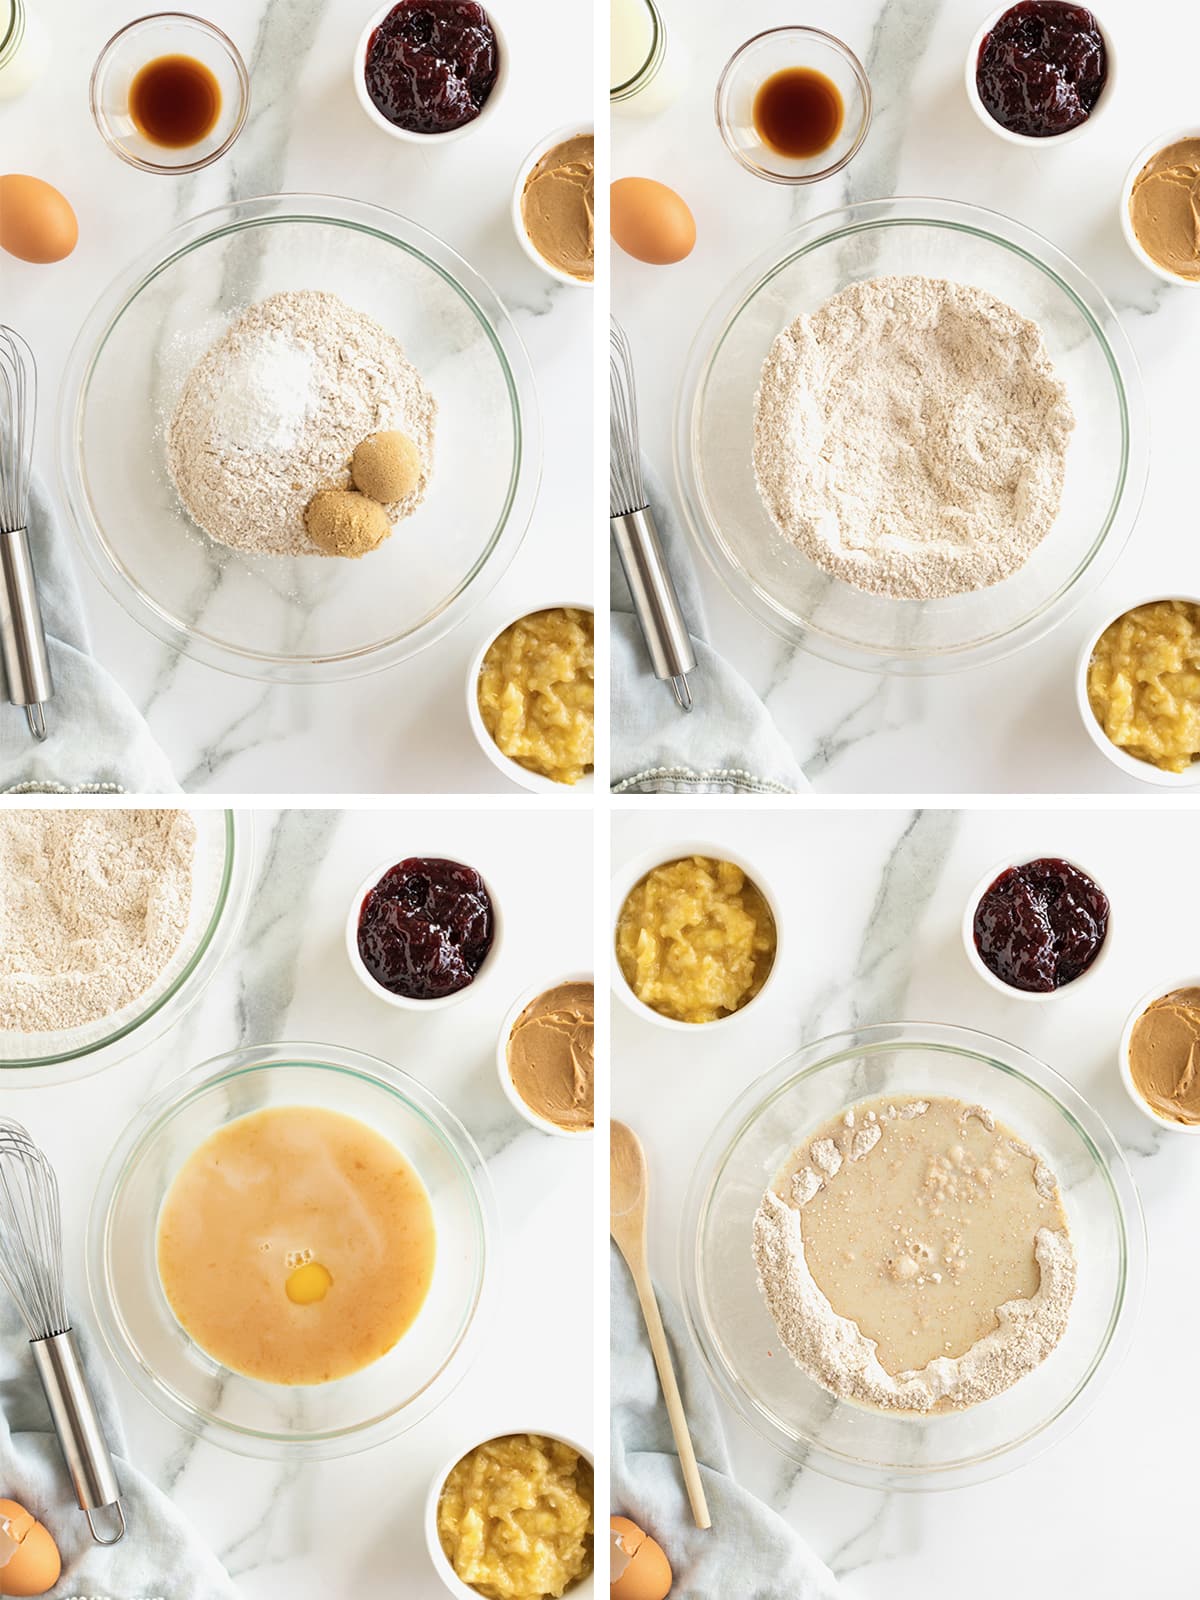 Steps to make banana pancake peanut butter and jelly sandwiches.